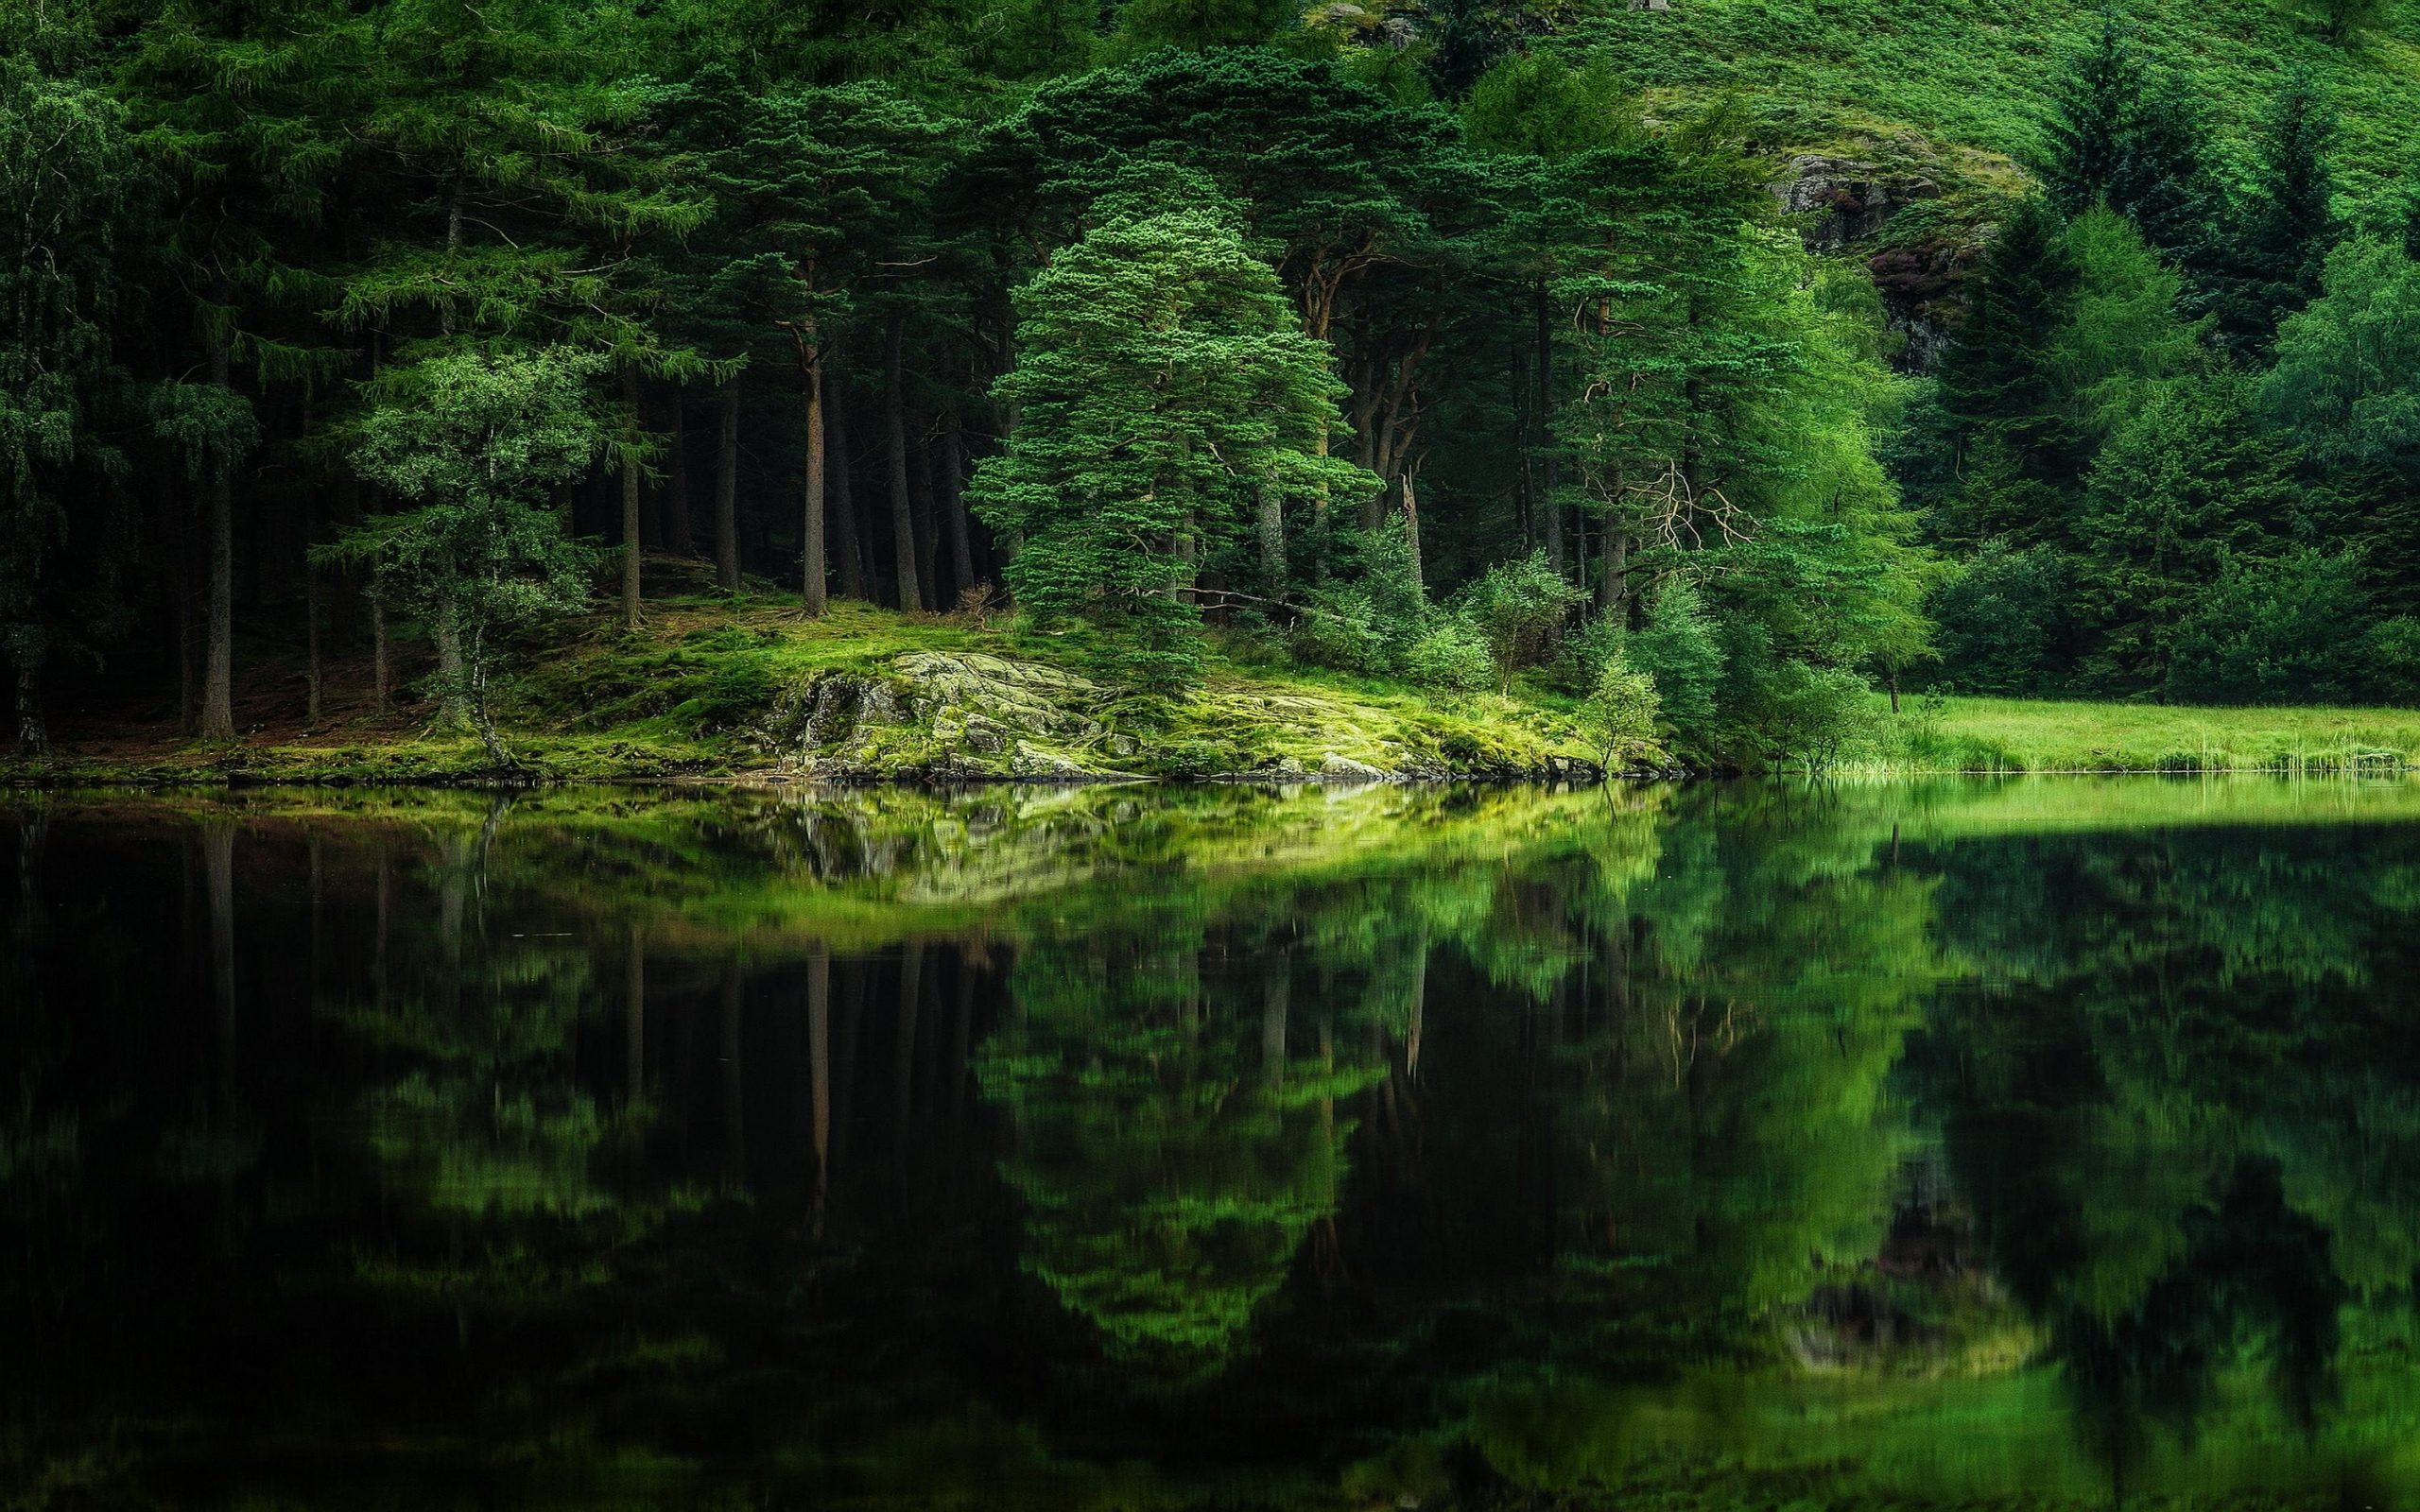 Green leafed trees wallpaper, nature, landscape, mirror, water, lake, forest